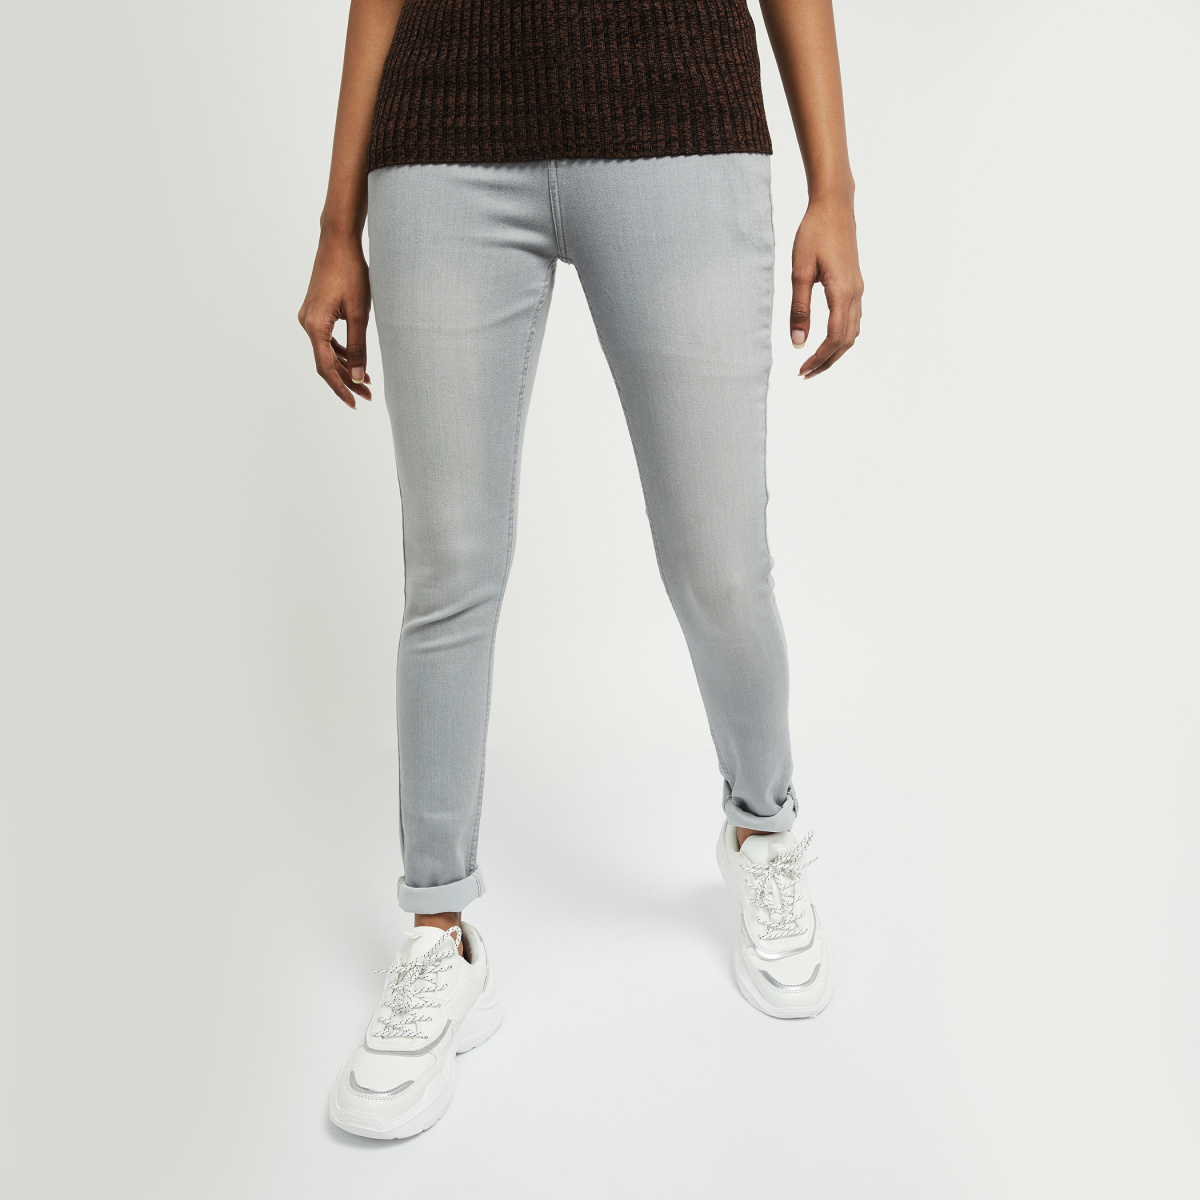 MAX Solid Light-Washed Skinny Fit Jeans